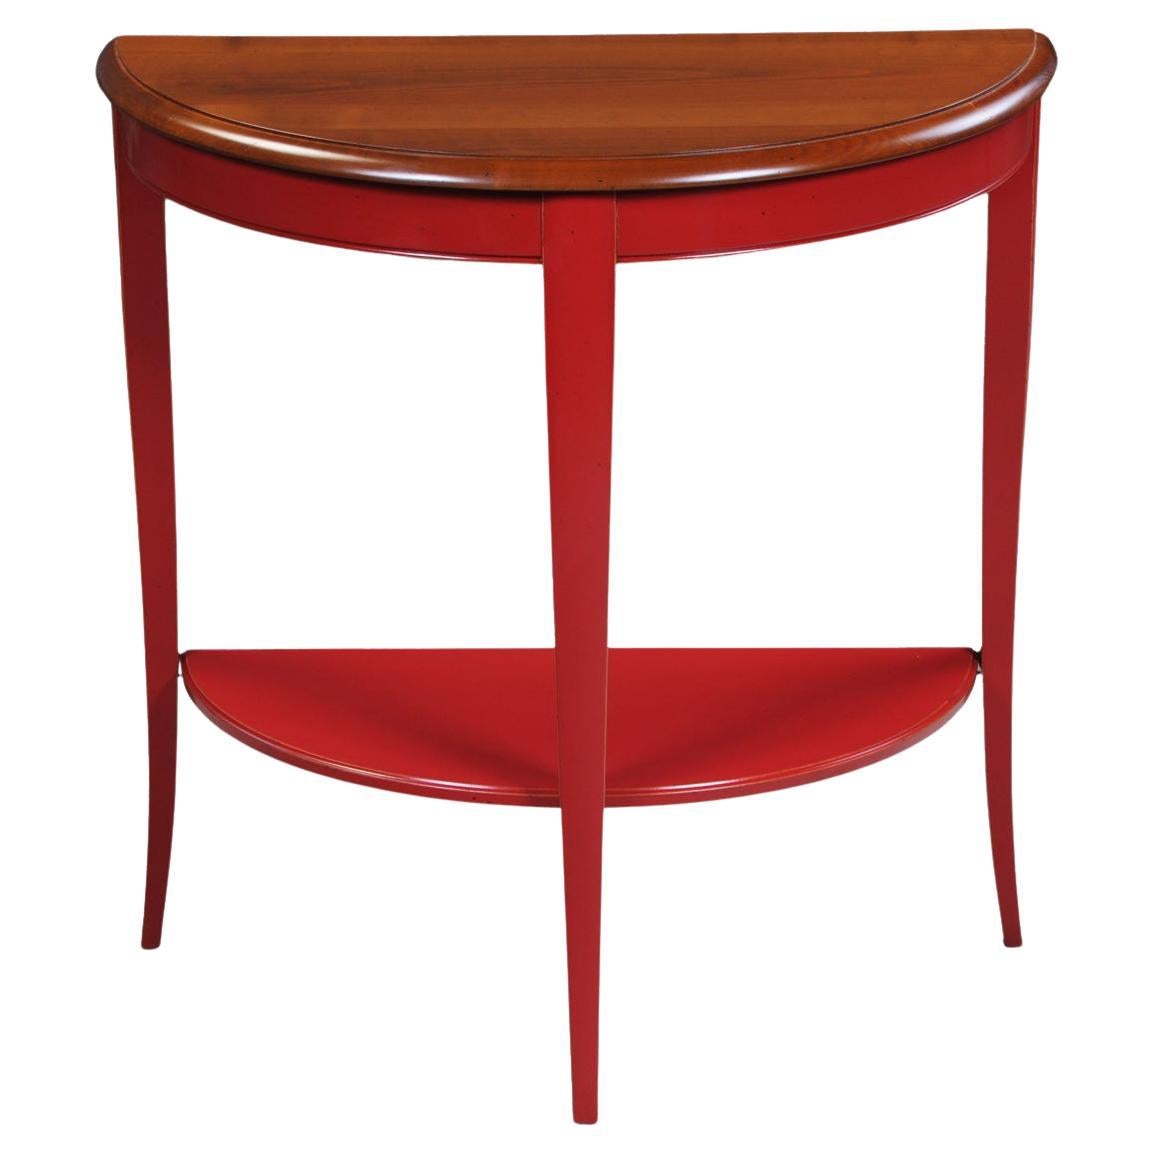 French provincial demi-lune console table in solid cherry,  red lacquered